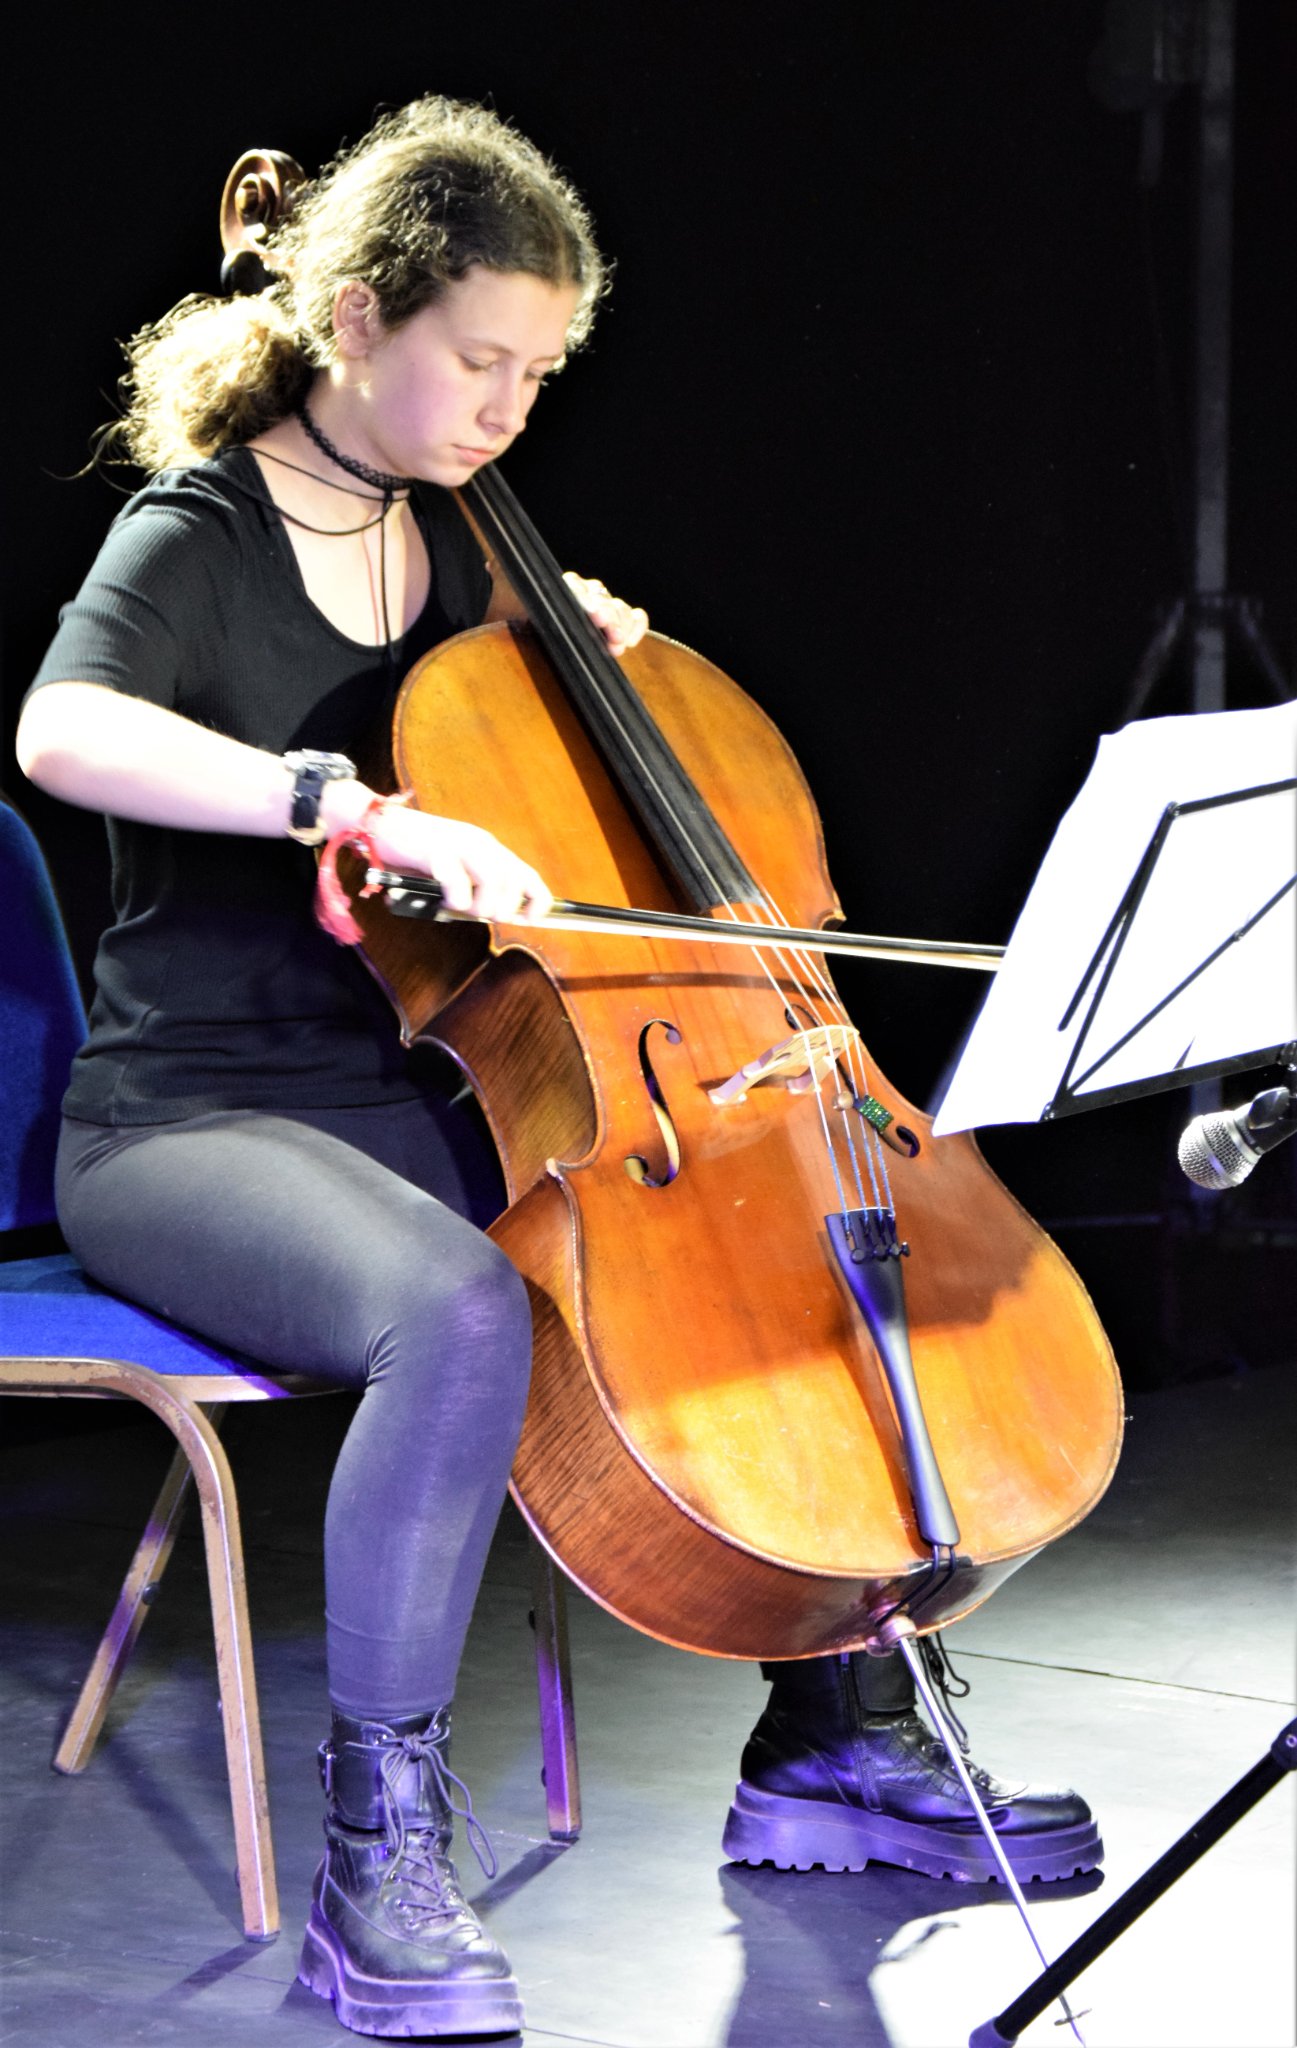 Photo of a young person playing an cello on stage